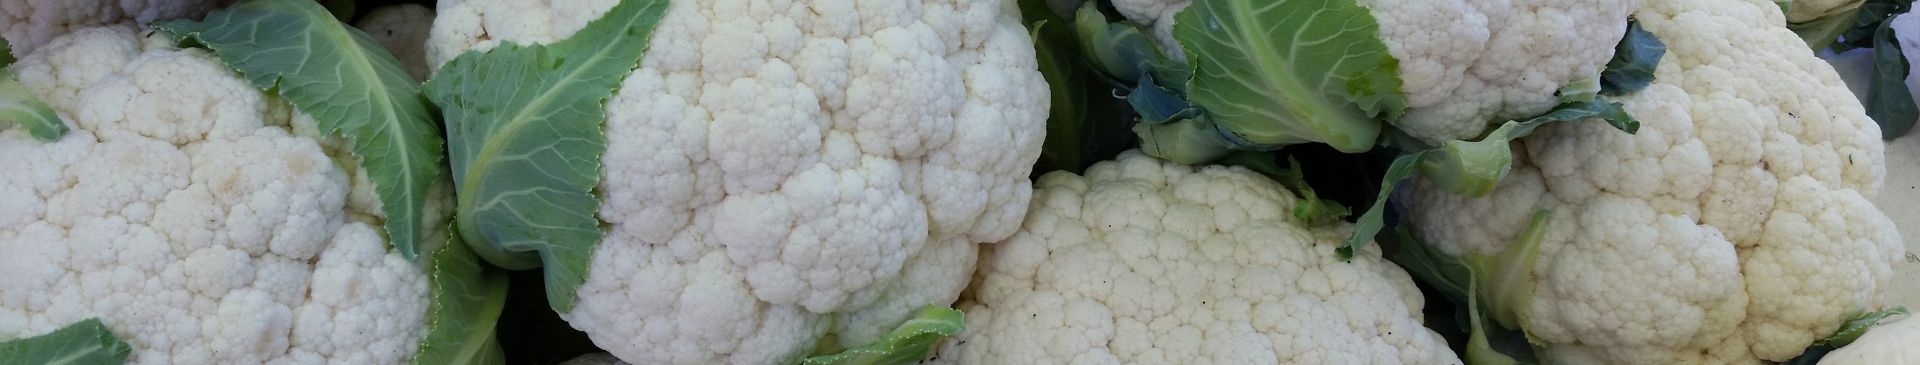 Troubleshooting: Solving Issues with Cauliflower Heads